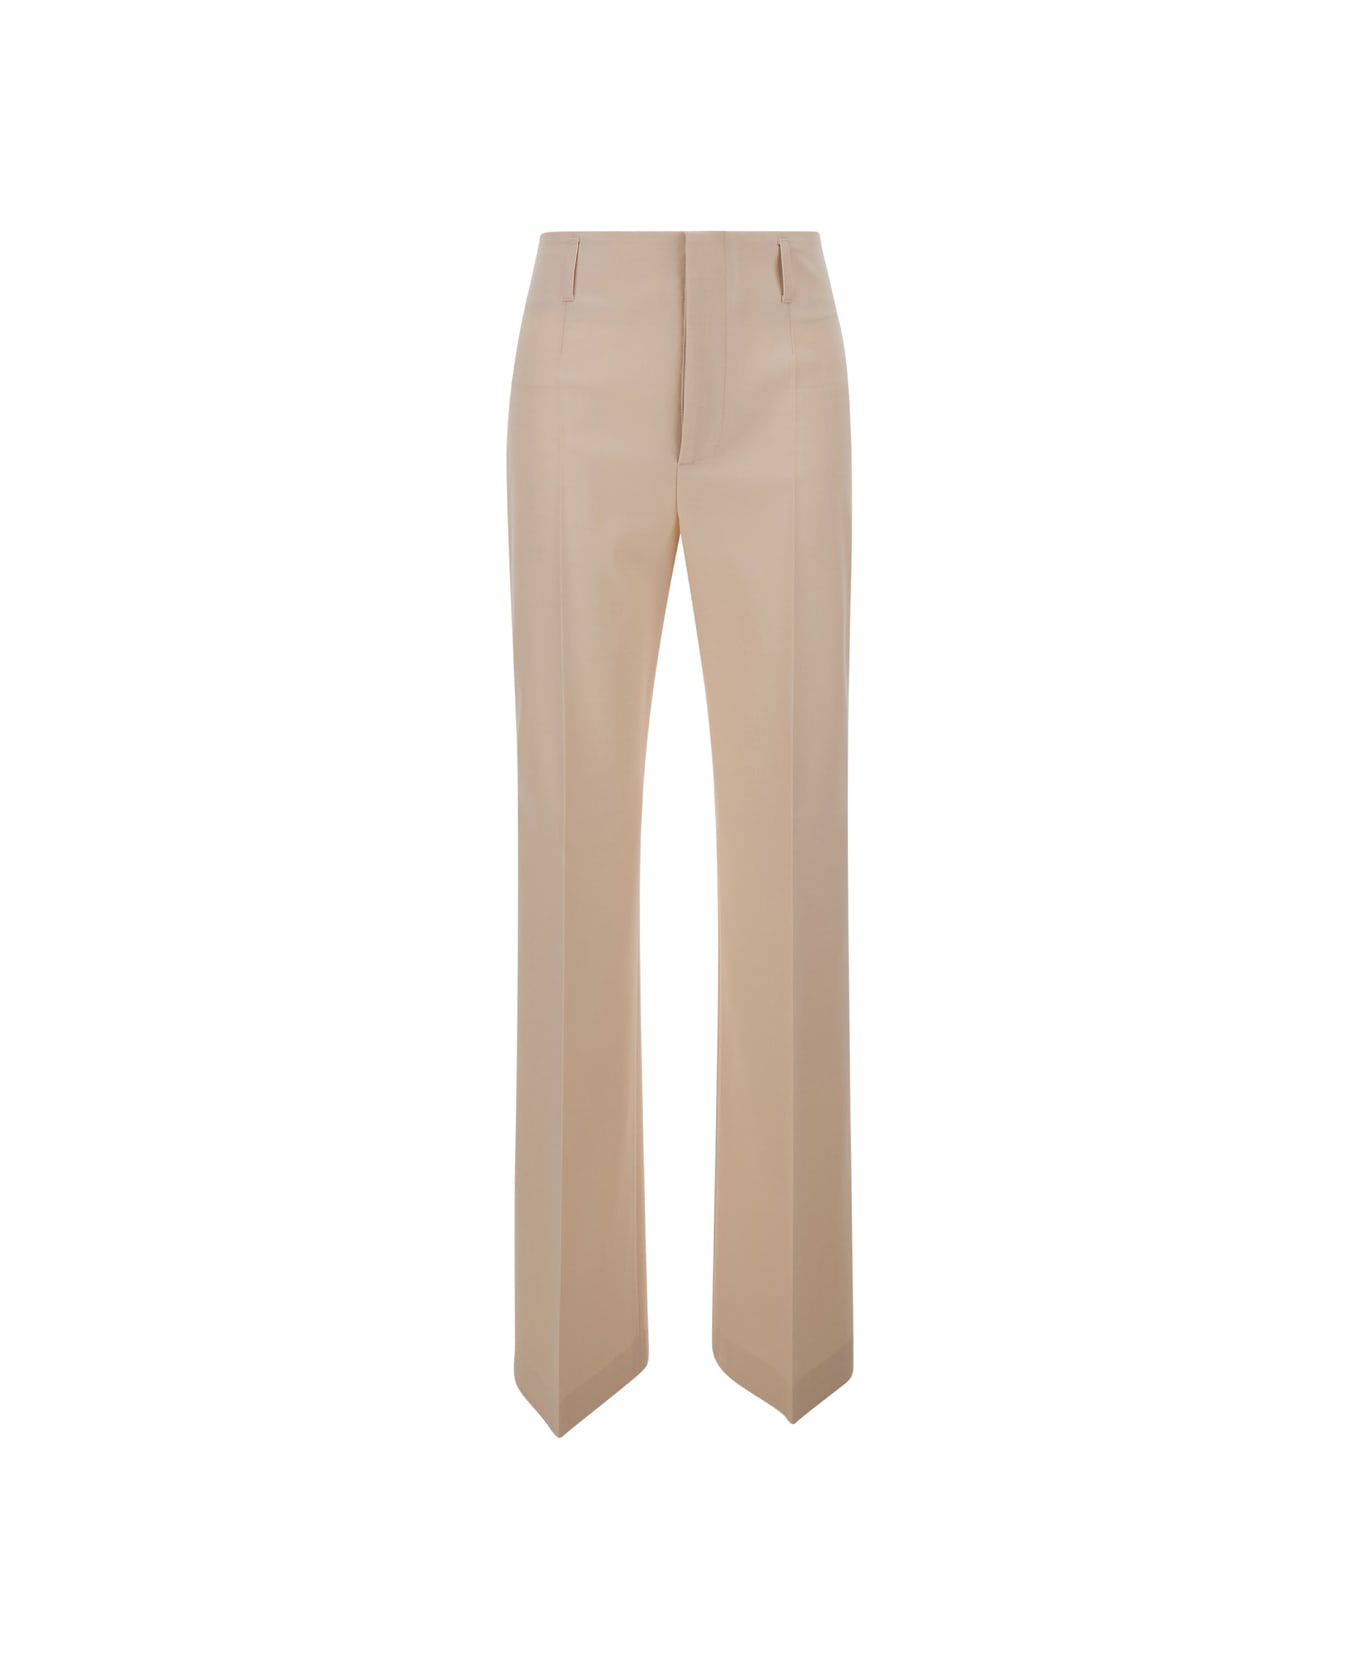 Philosophy di Lorenzo Serafini Ivory White High Waisted Tailored Trousers In Technical Fabric Woman - Beige